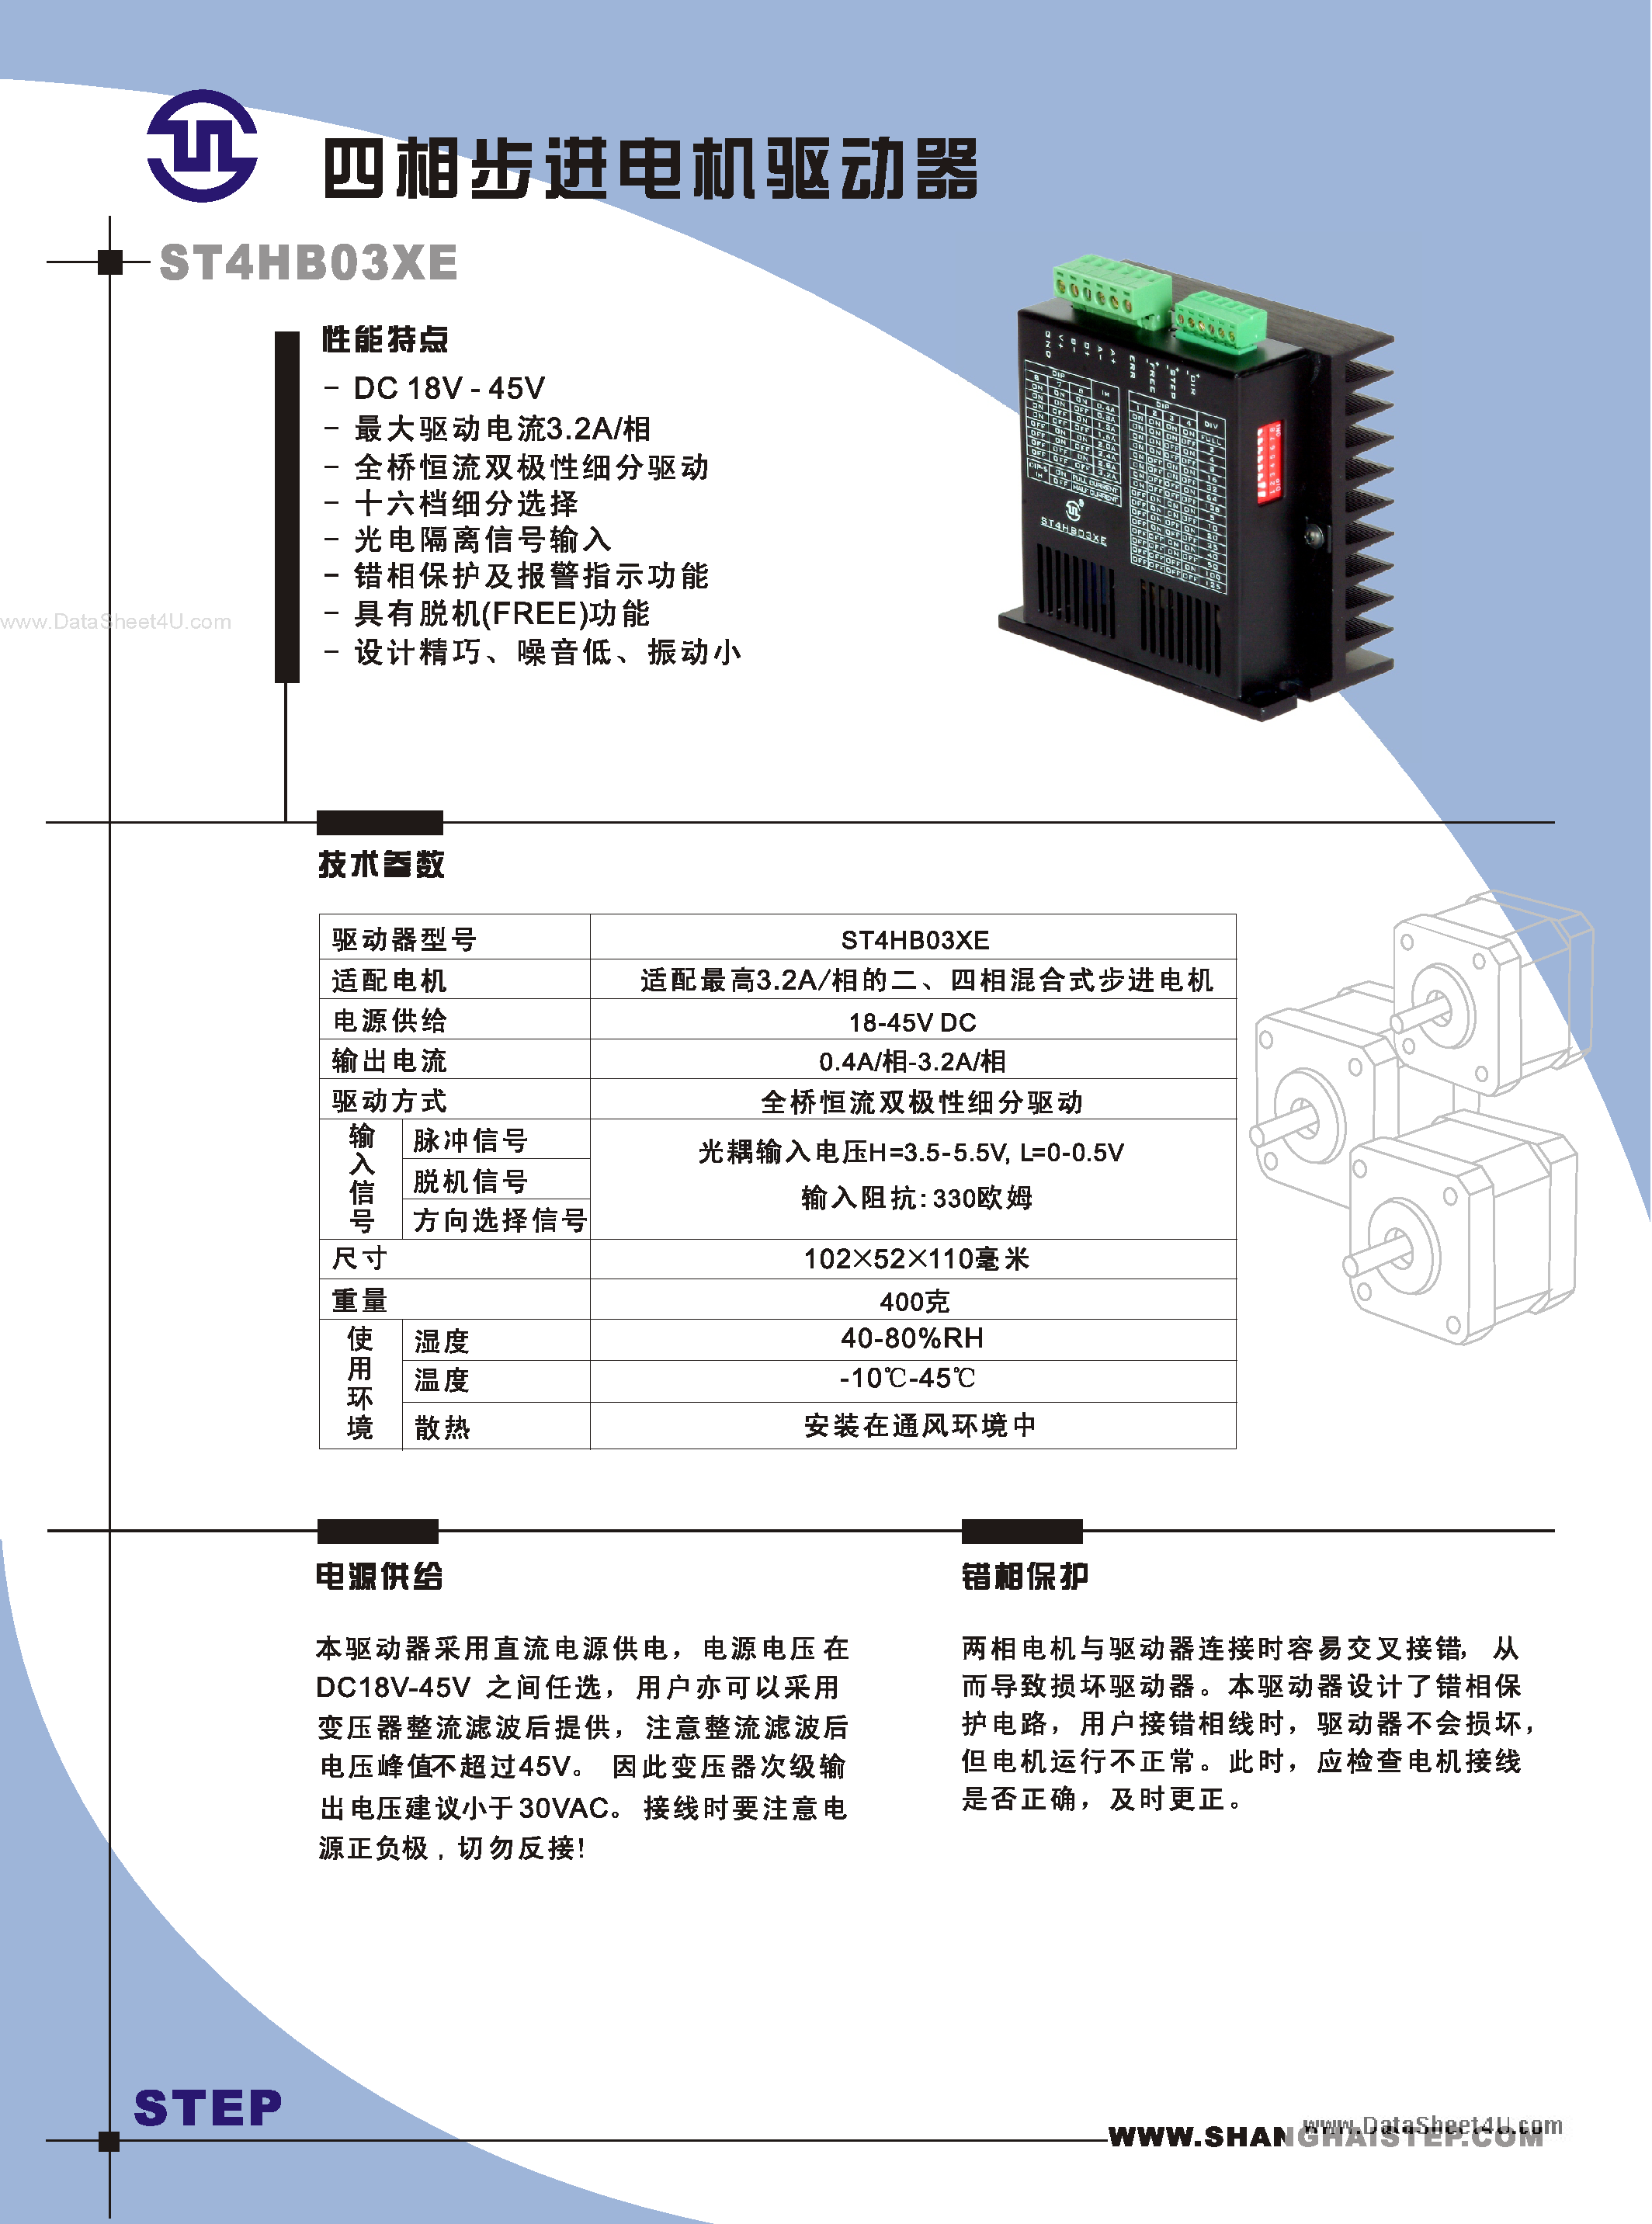 Datasheet ST4HB03XE - ST4HB03XE page 1